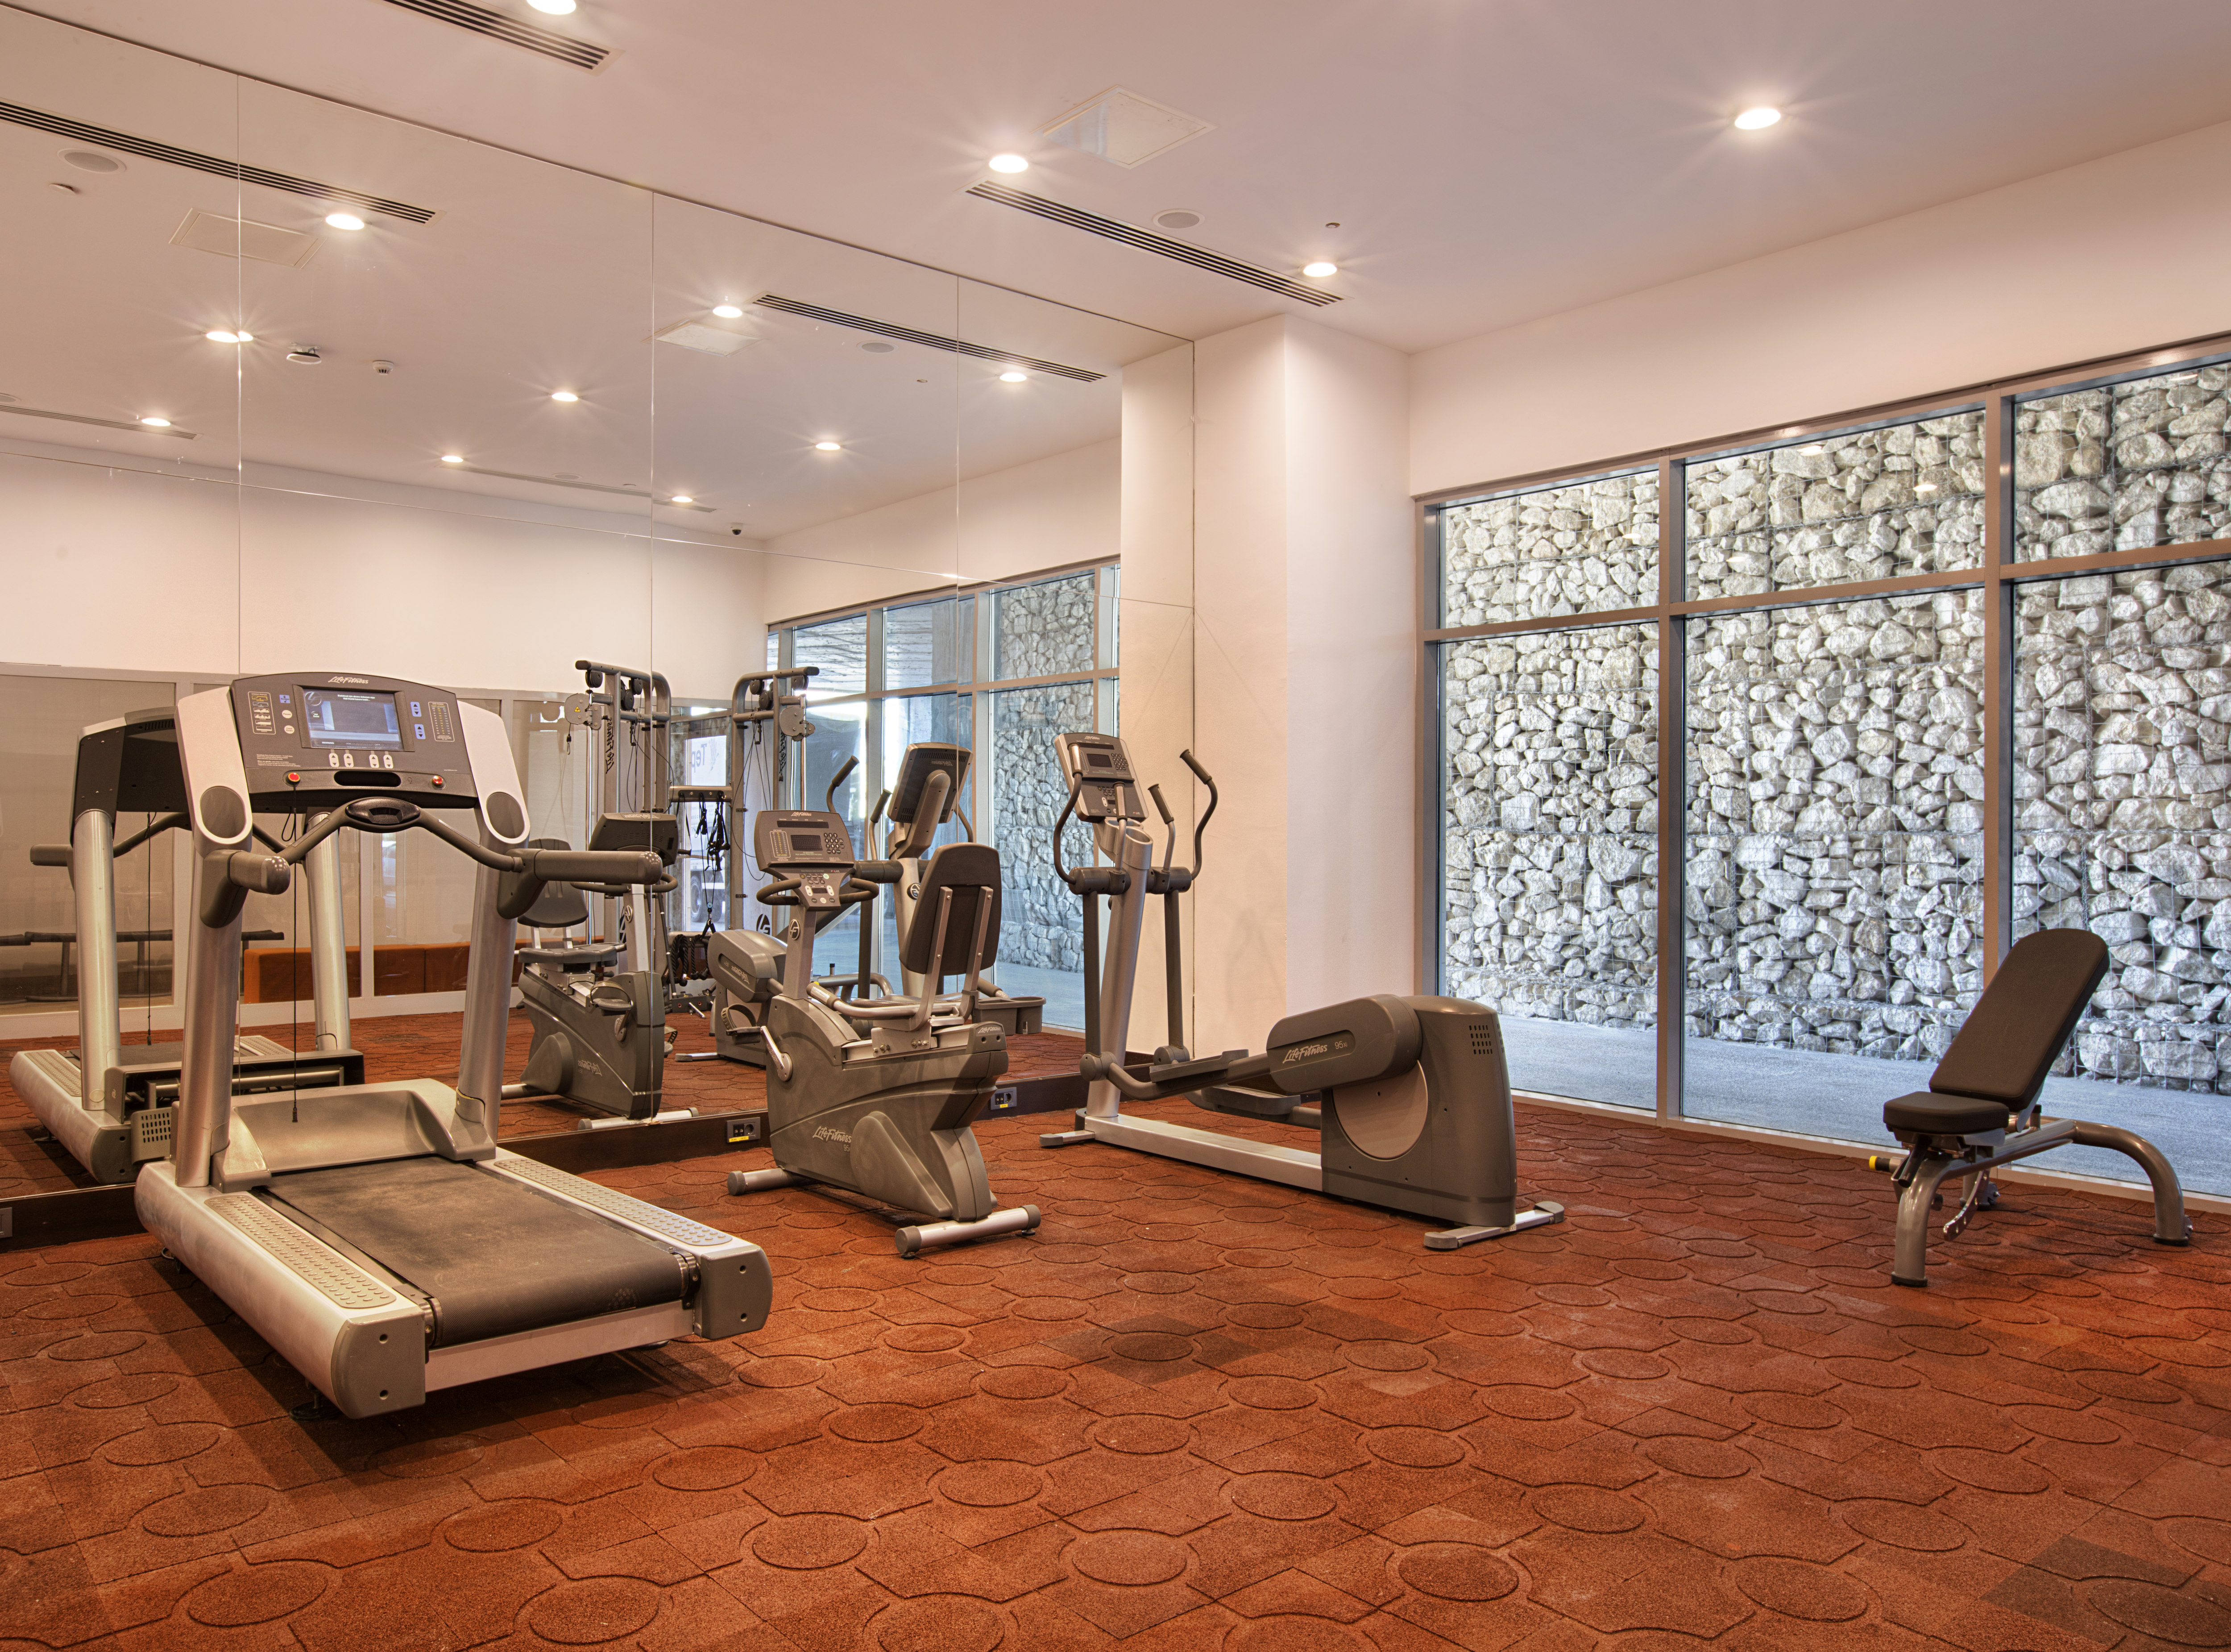 Fitness Center With Weight Bench and Cardio Equipment